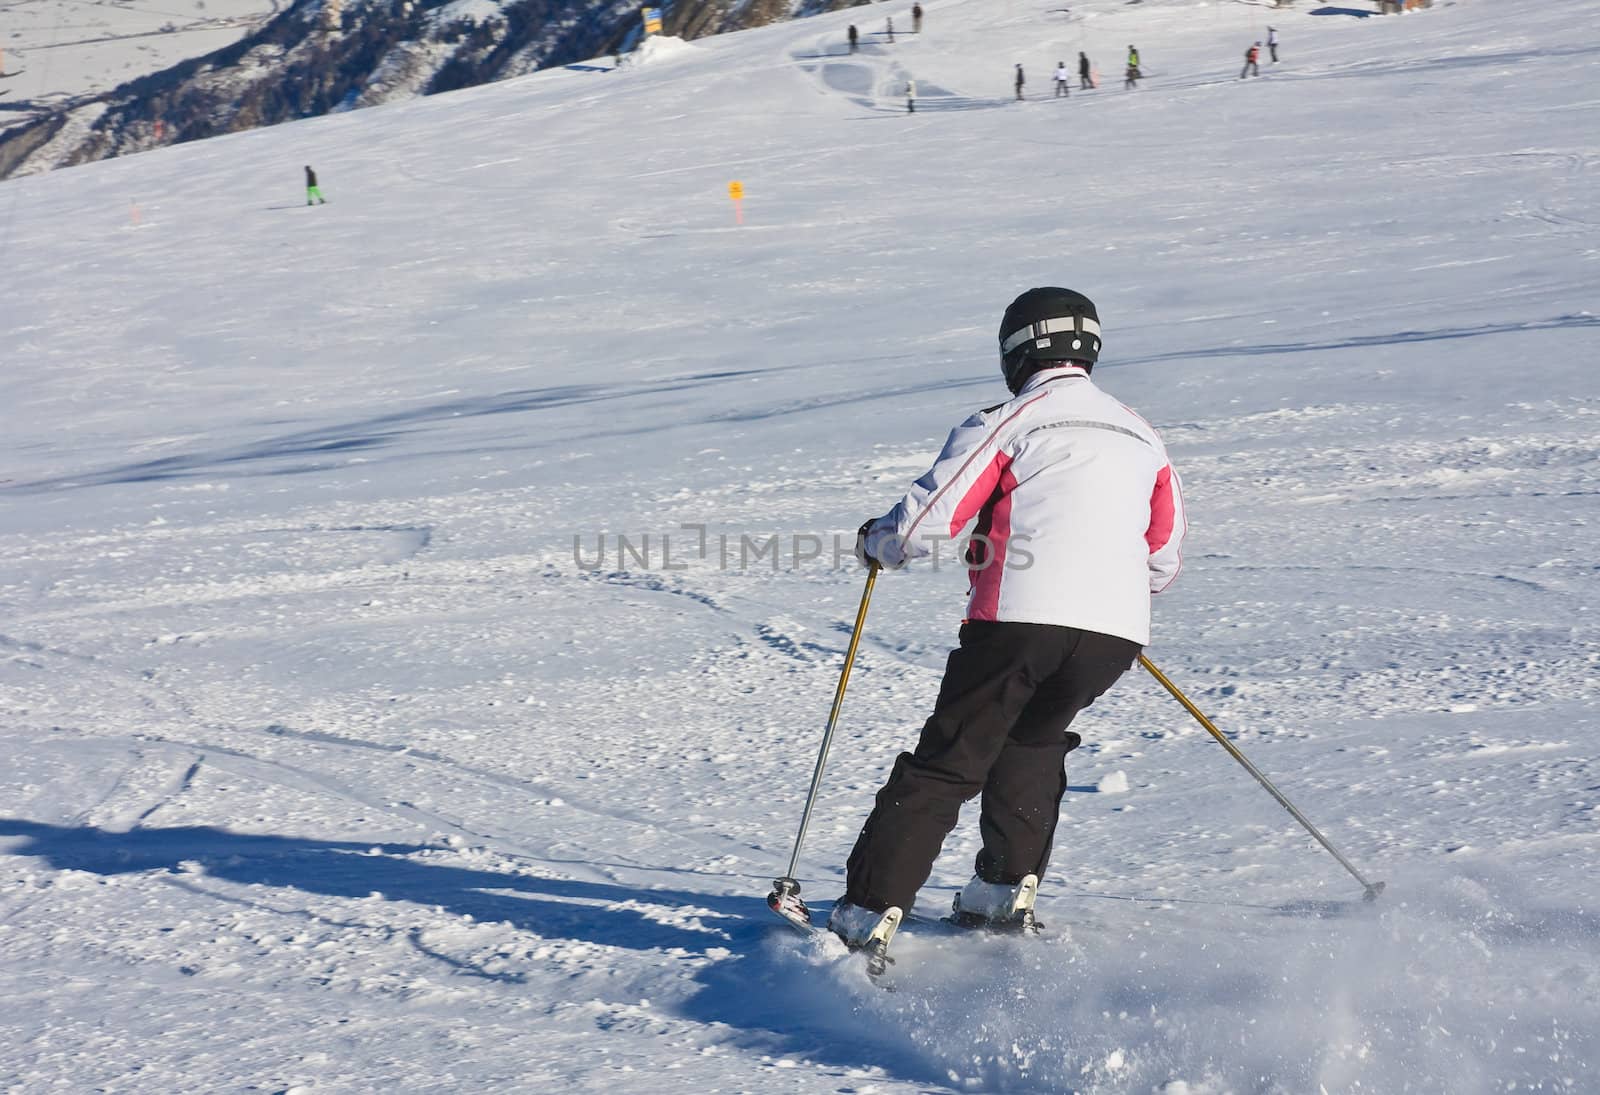 A woman is skiing at a ski resort by nikolpetr